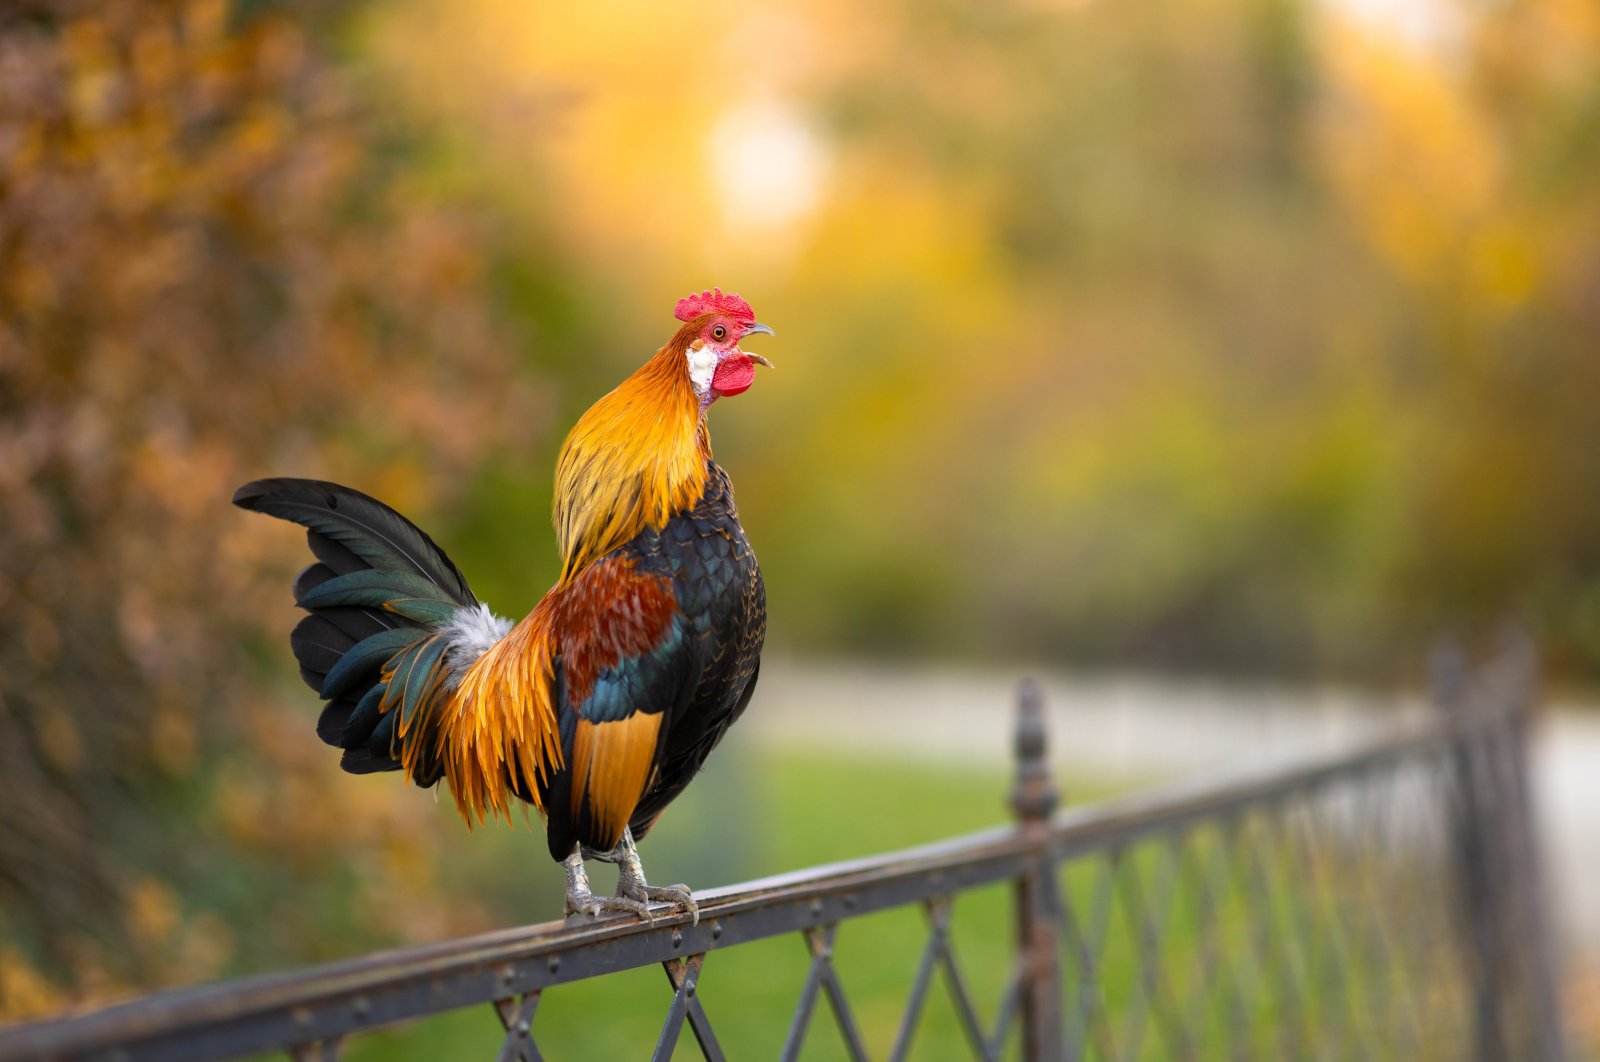 The owner of the rooster was ordered to kill the bird after complaints from his neighbors.